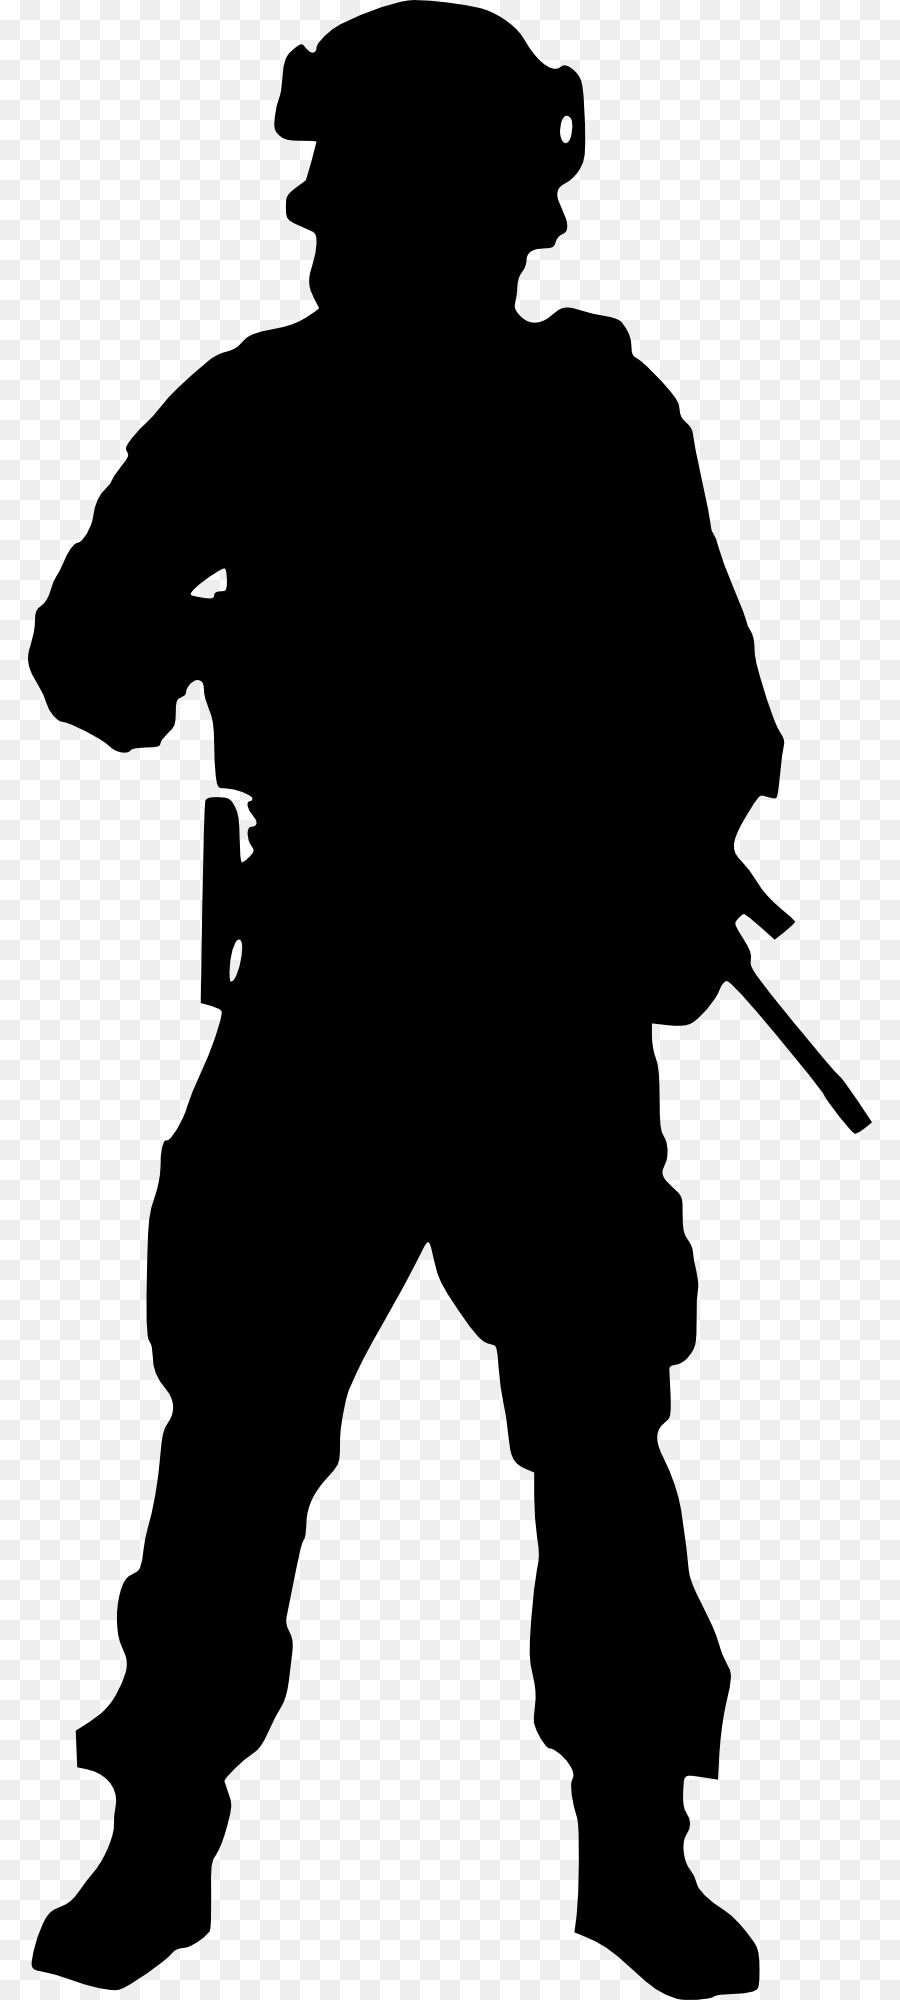 Soldier Silhouette clipart - Soldier, Silhouette, Drawing 